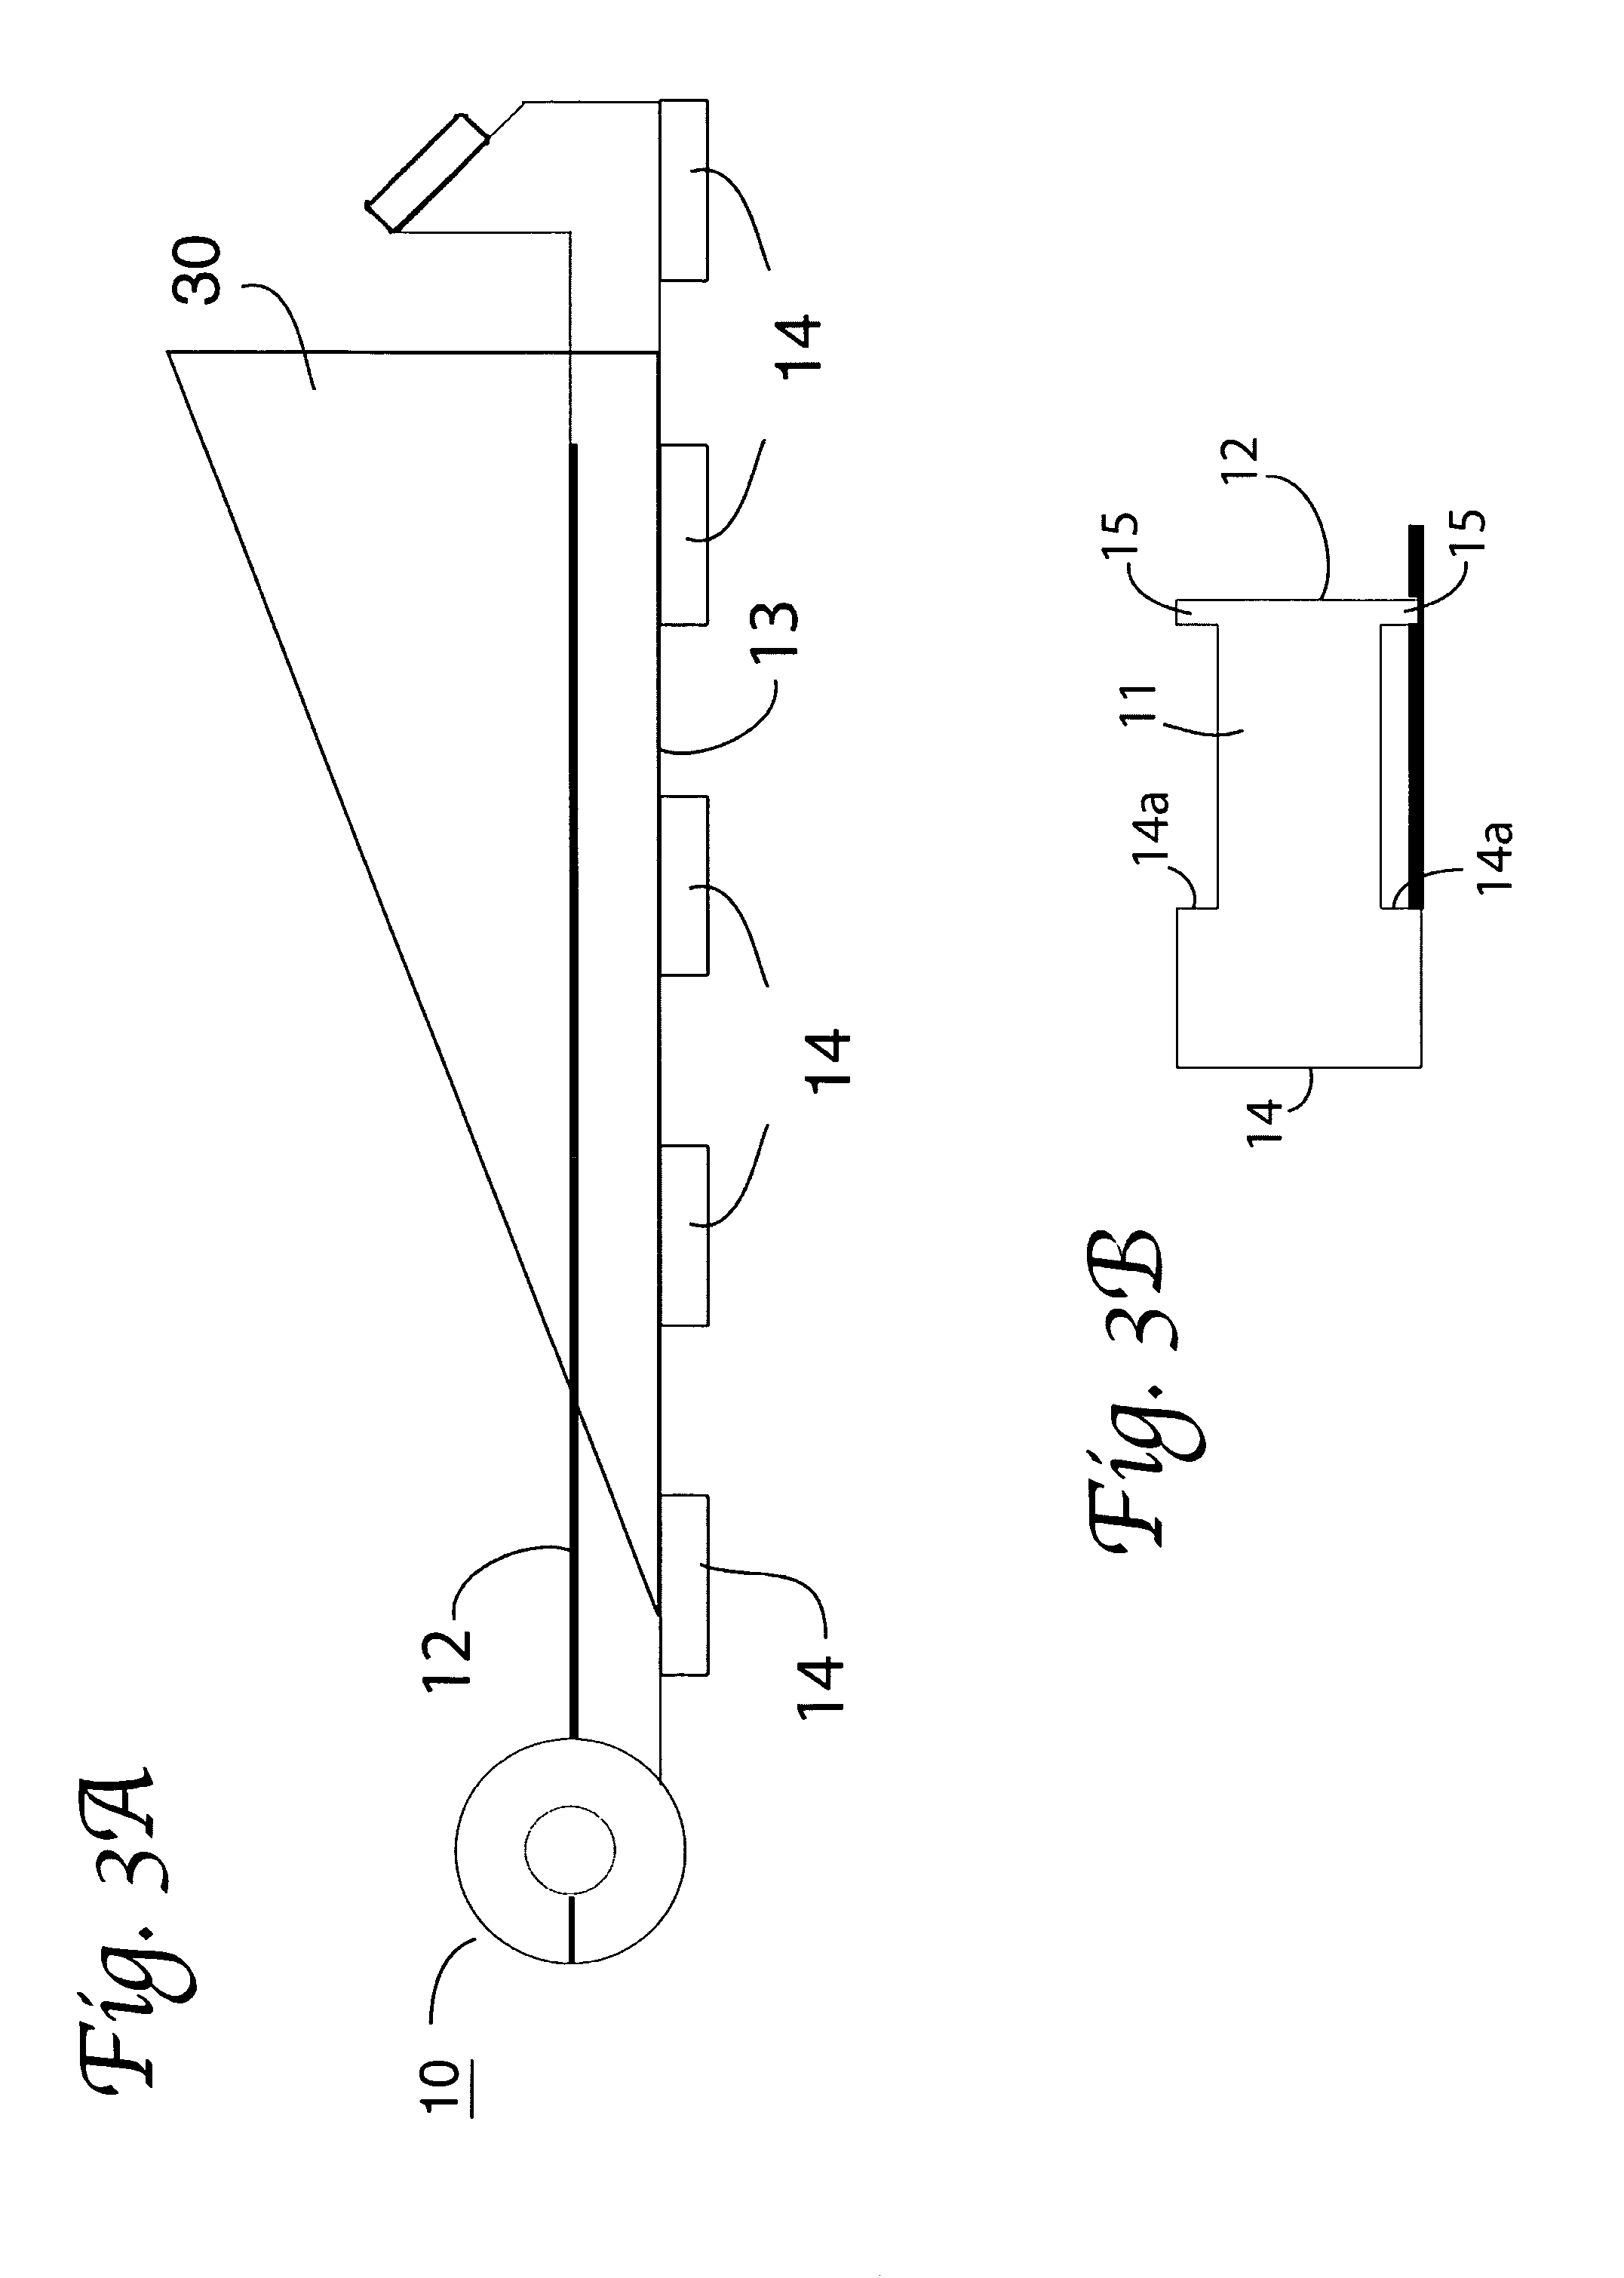 Apparatus for preparing material pieces to be sewn